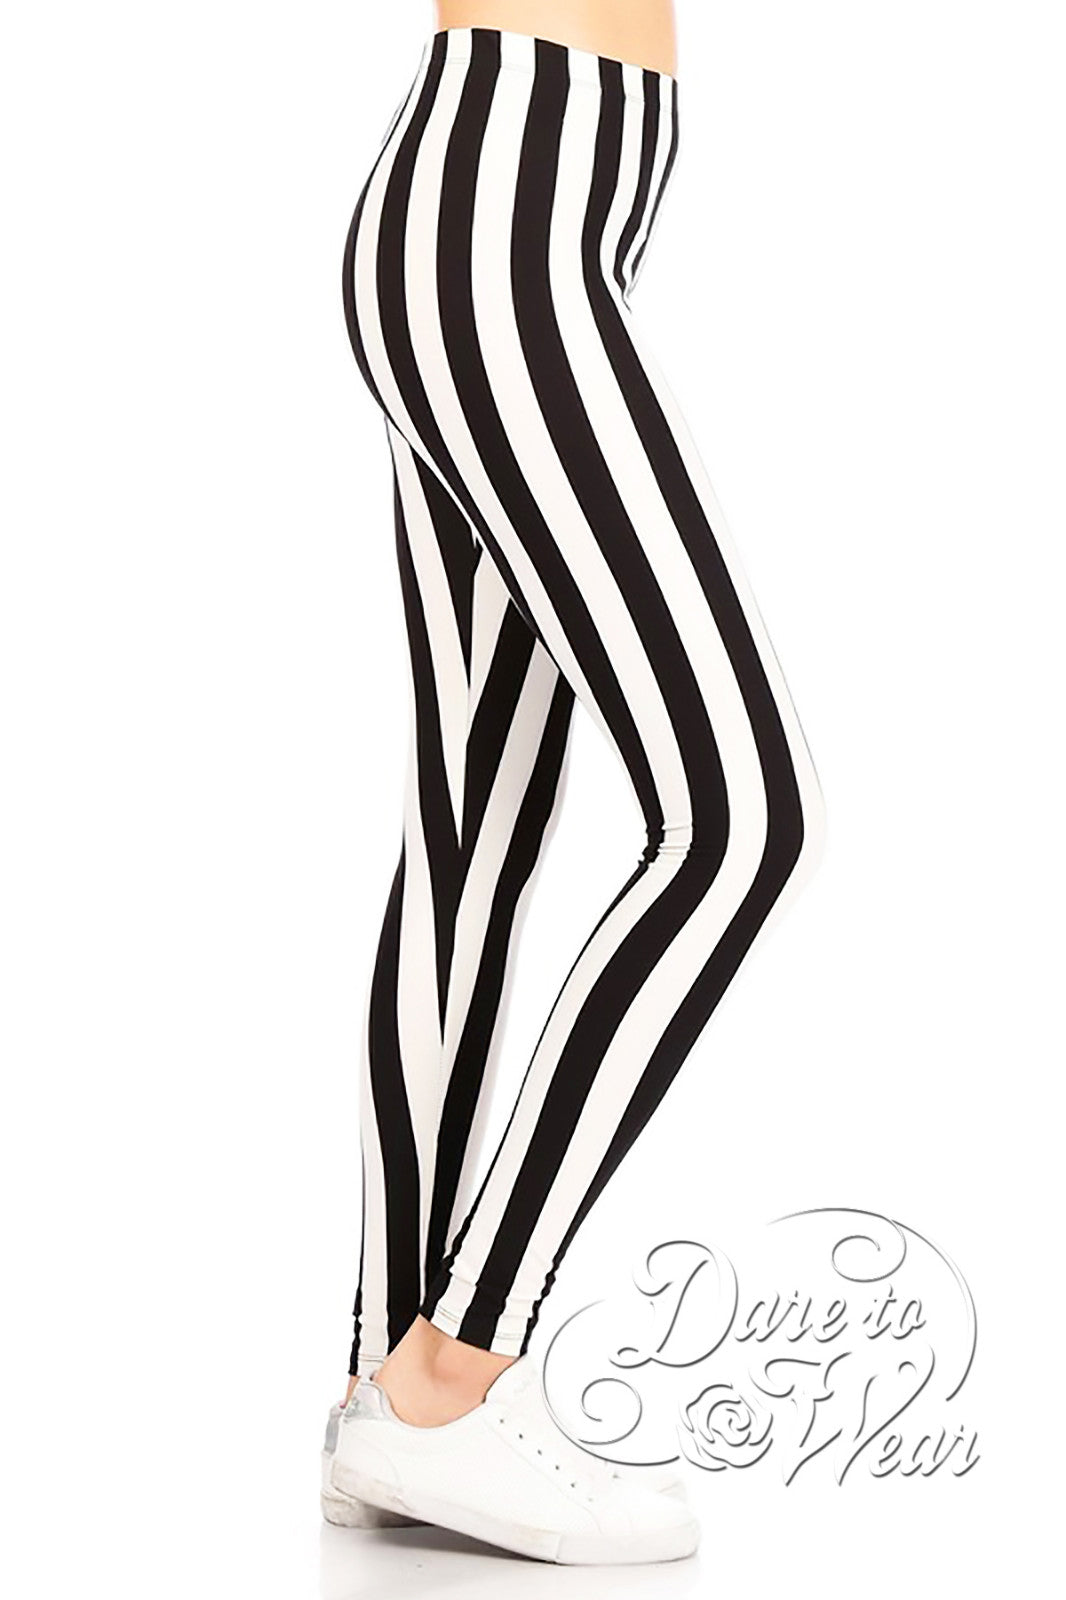 Peached Leggings in Beetlejuice  Black White Vertically Striped Tights -  Dare Fashion Globe